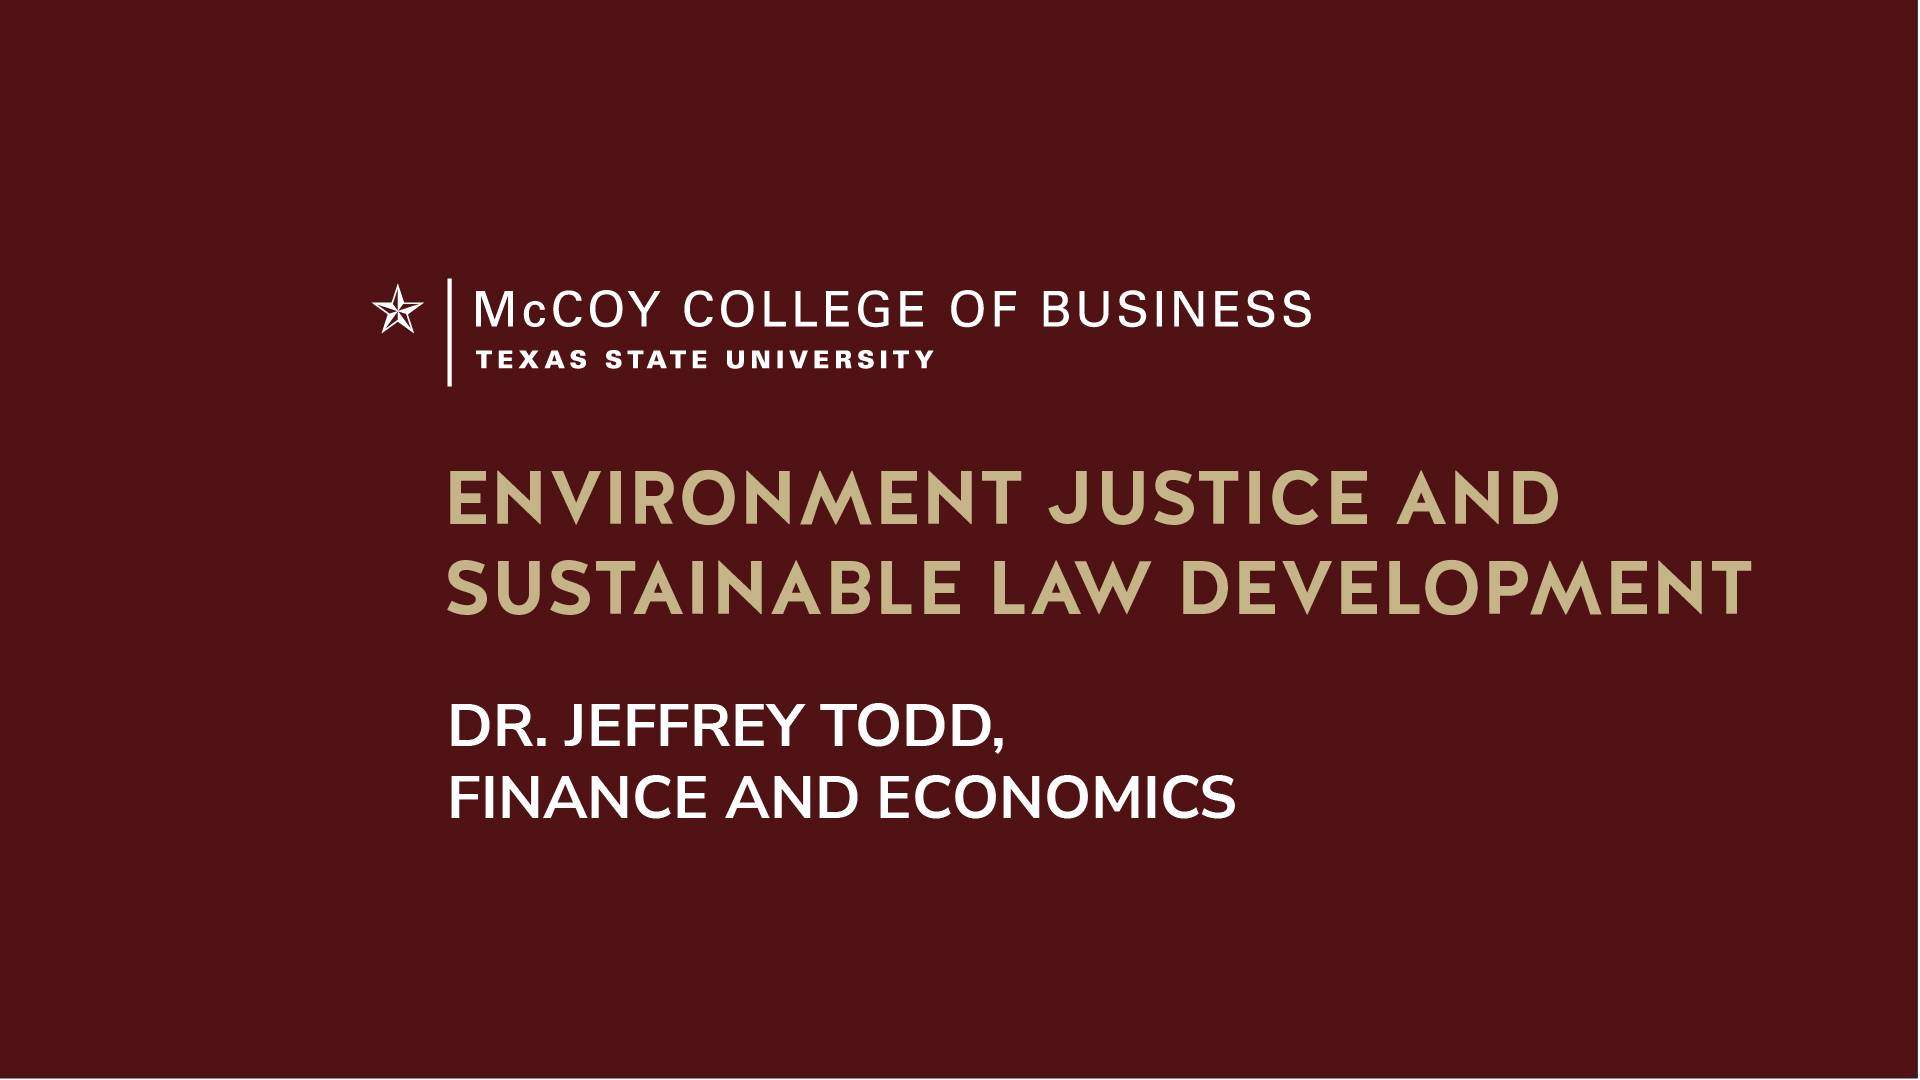 Dr. Jeffery Todd discusses Environment Justice and Sustainable Development Law